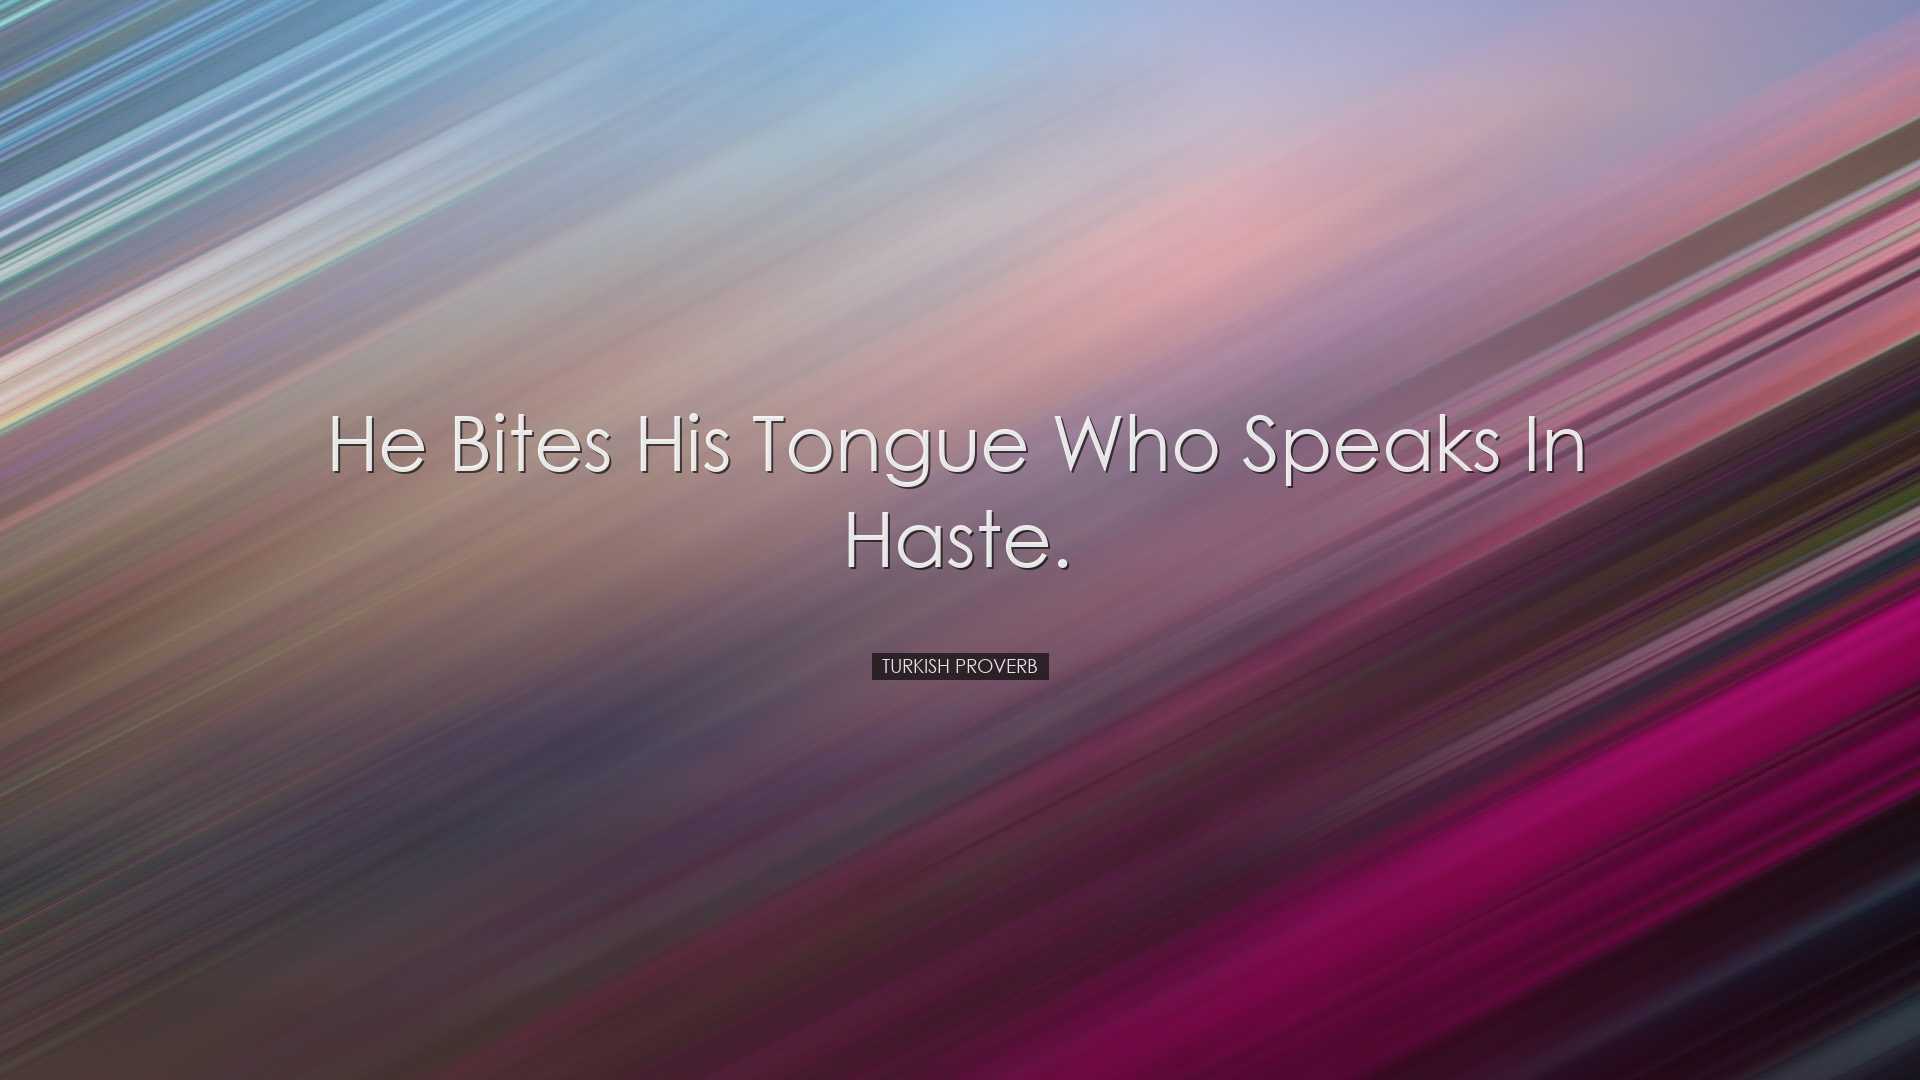 He bites his tongue who speaks in haste. - Turkish Proverb